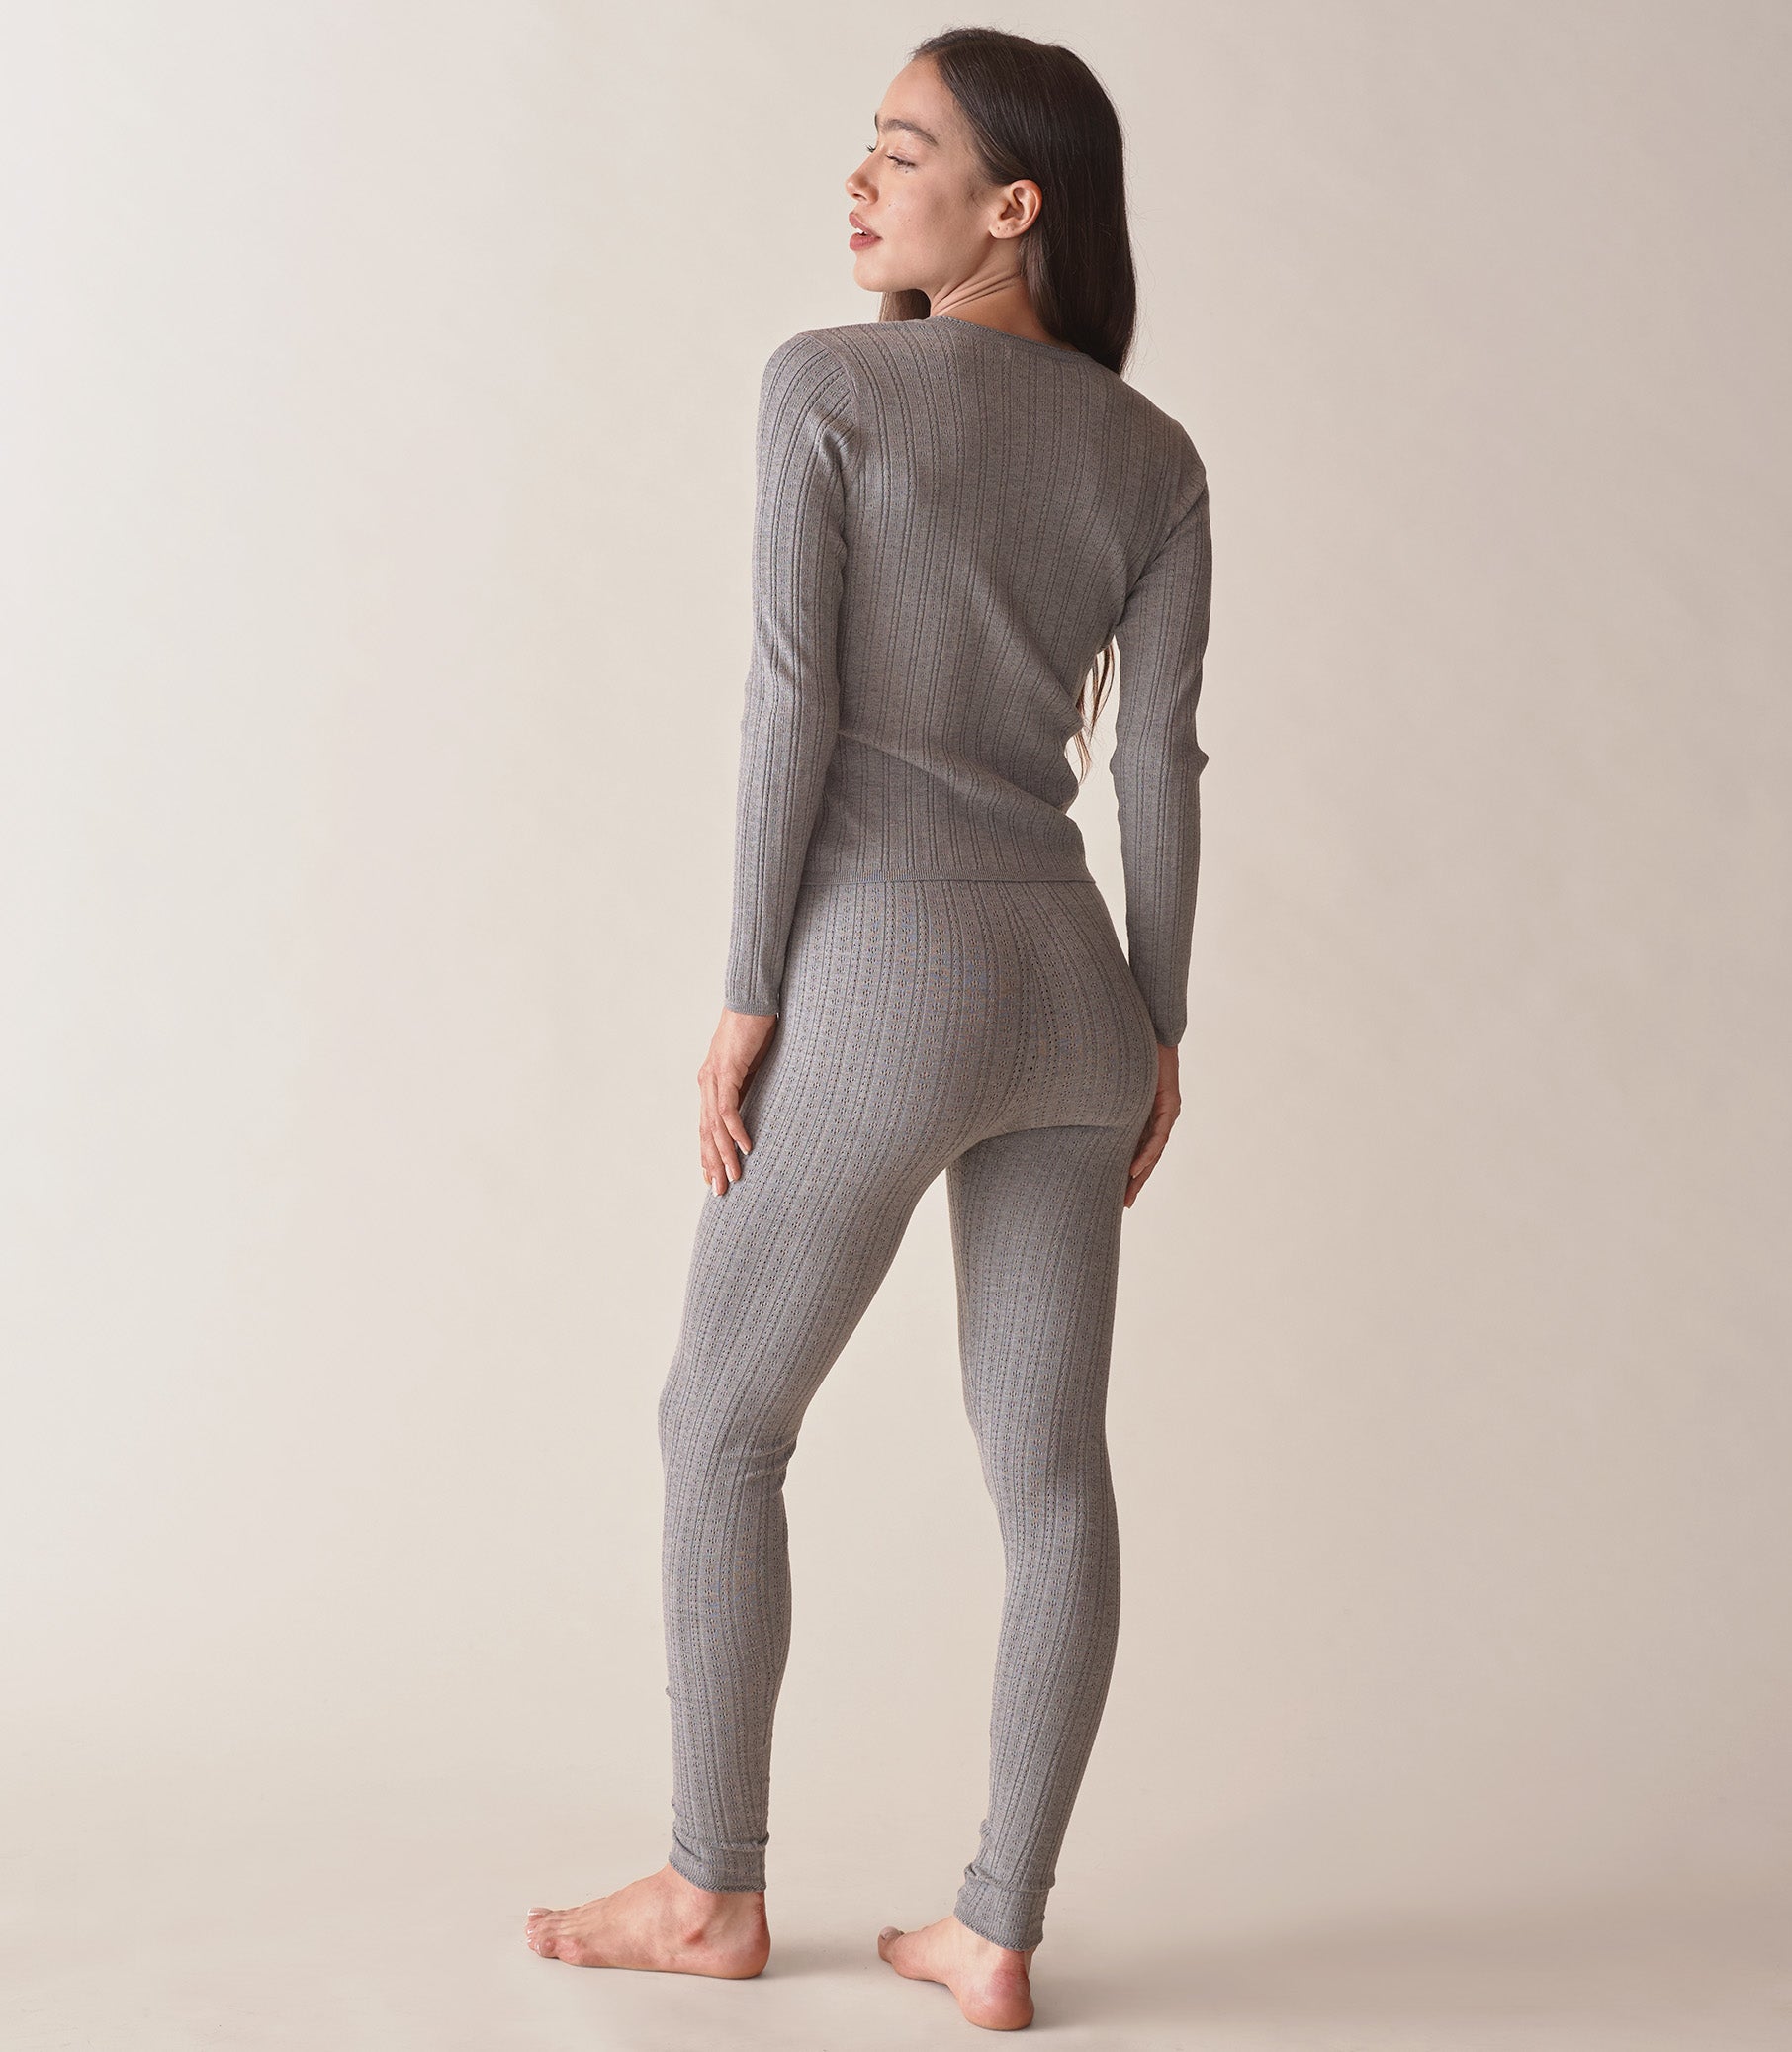 LETO KNIT PANT -- HEATHERED GREY view 6